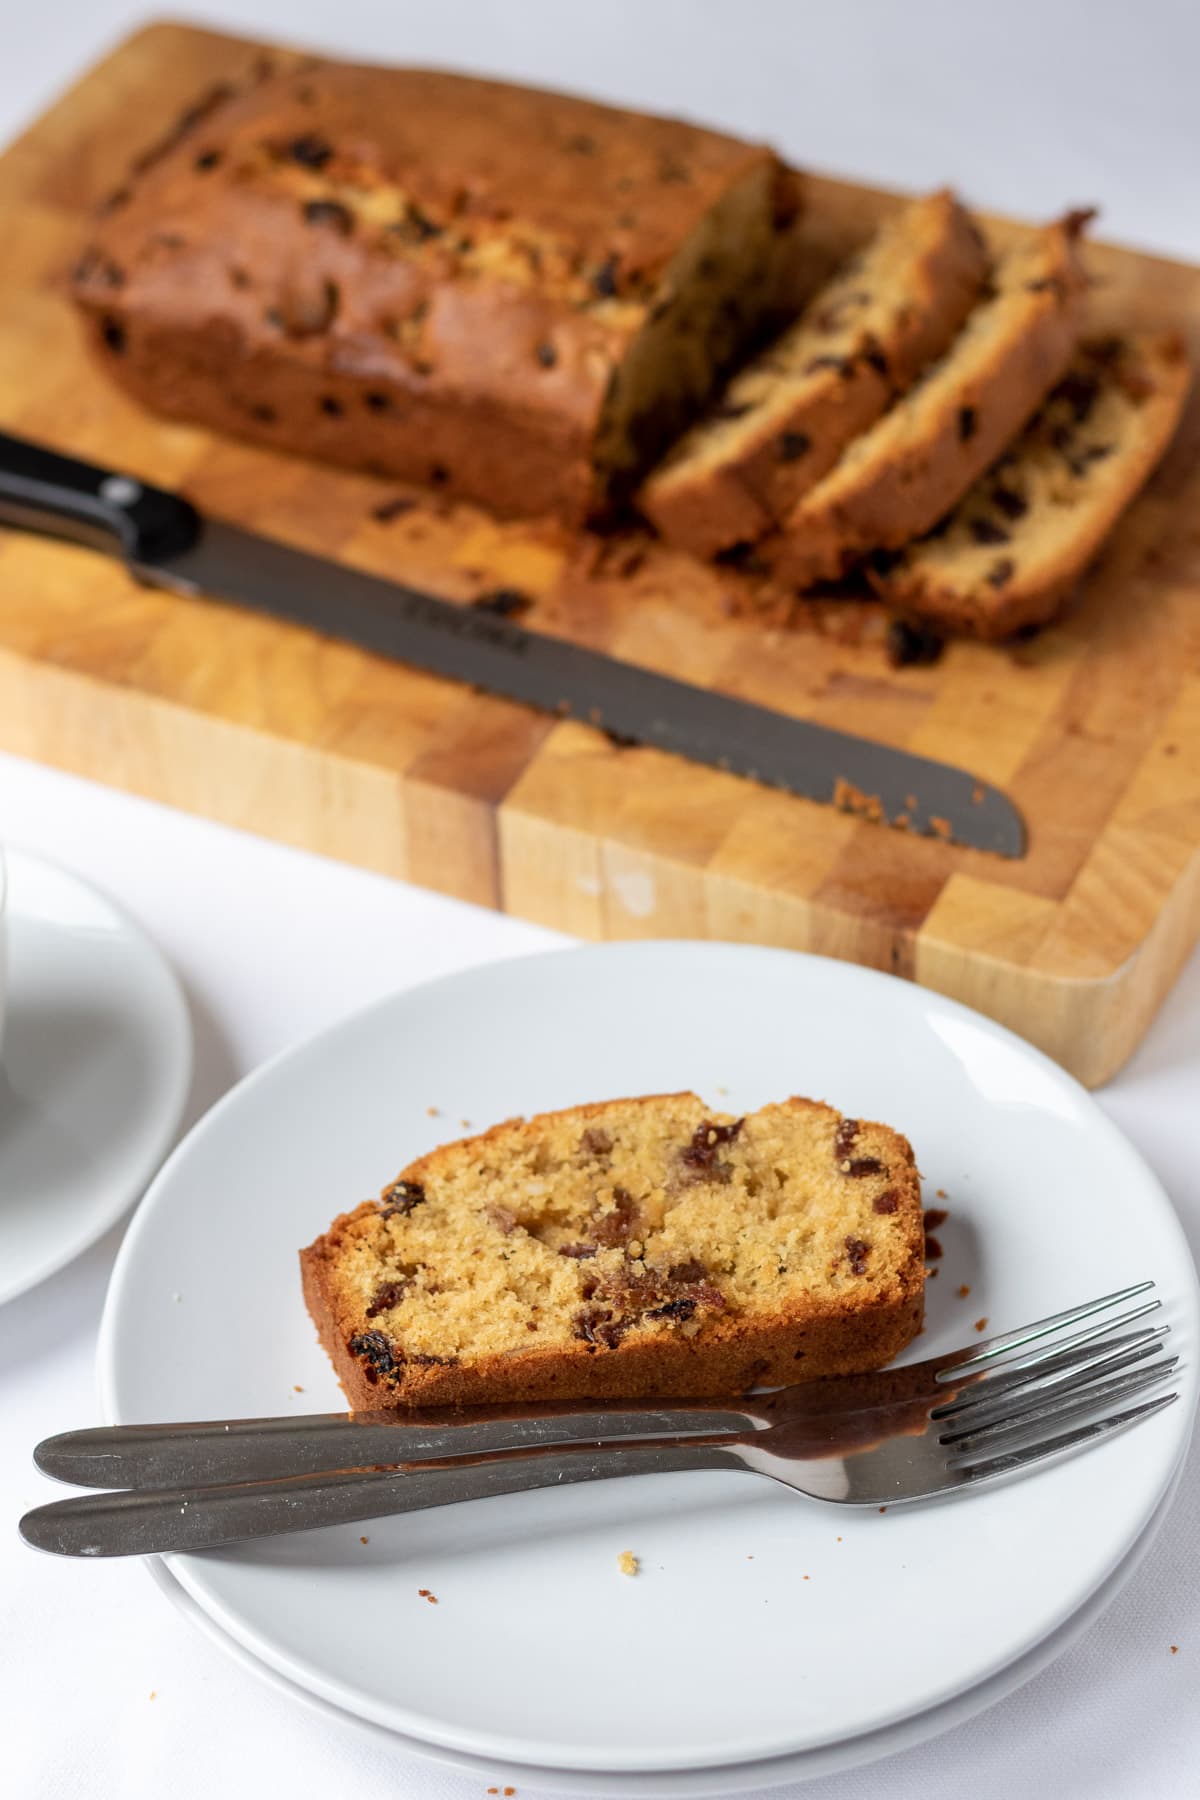 A slice of fruit loaf cake on a plate with two pastry forks alongside. Rest of loaf in the background on a chopping board.